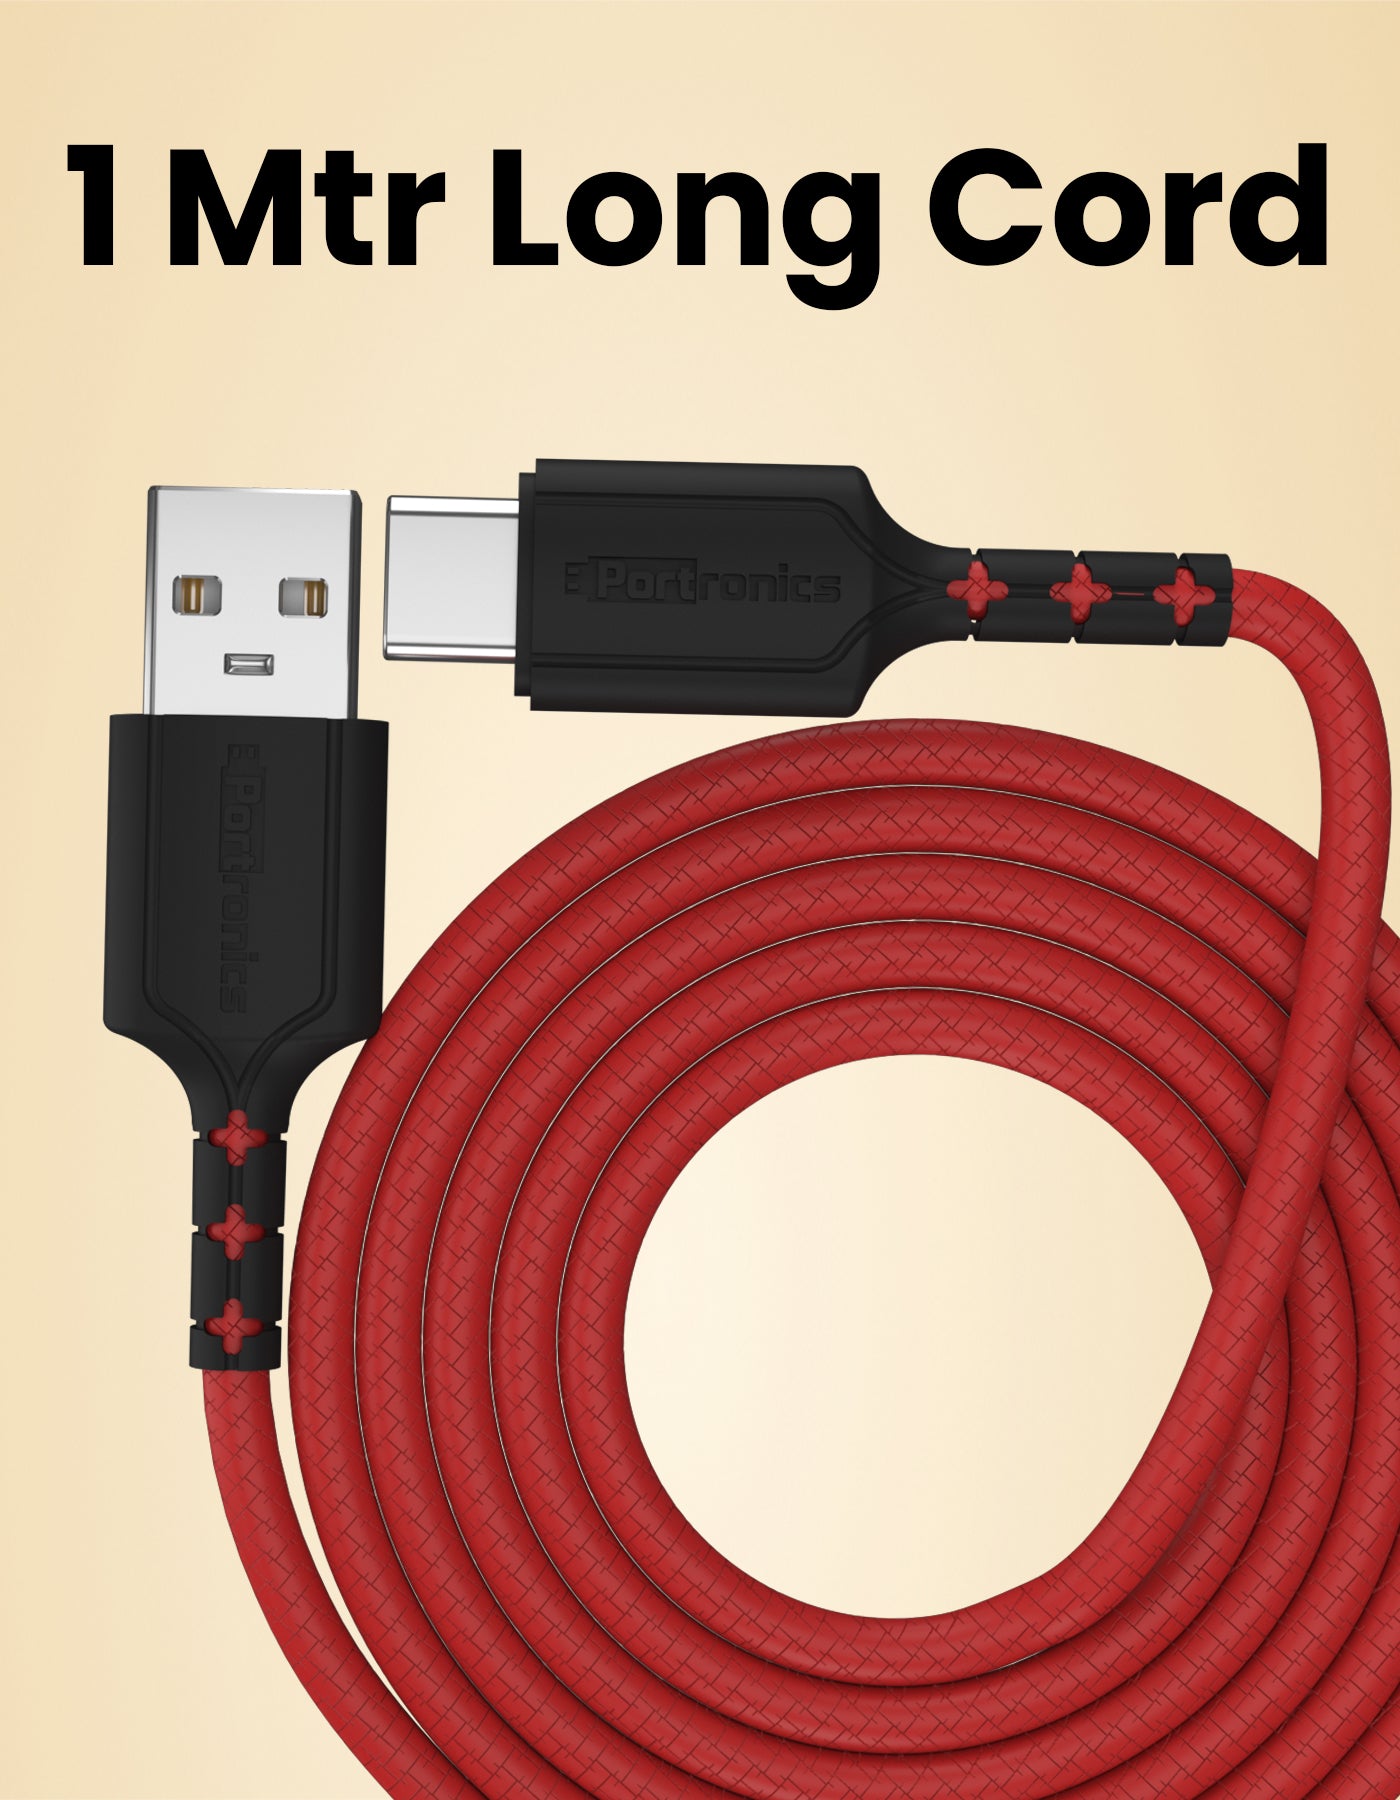 Portronics Konnect Dash Type C Cable 1 meter long cable 